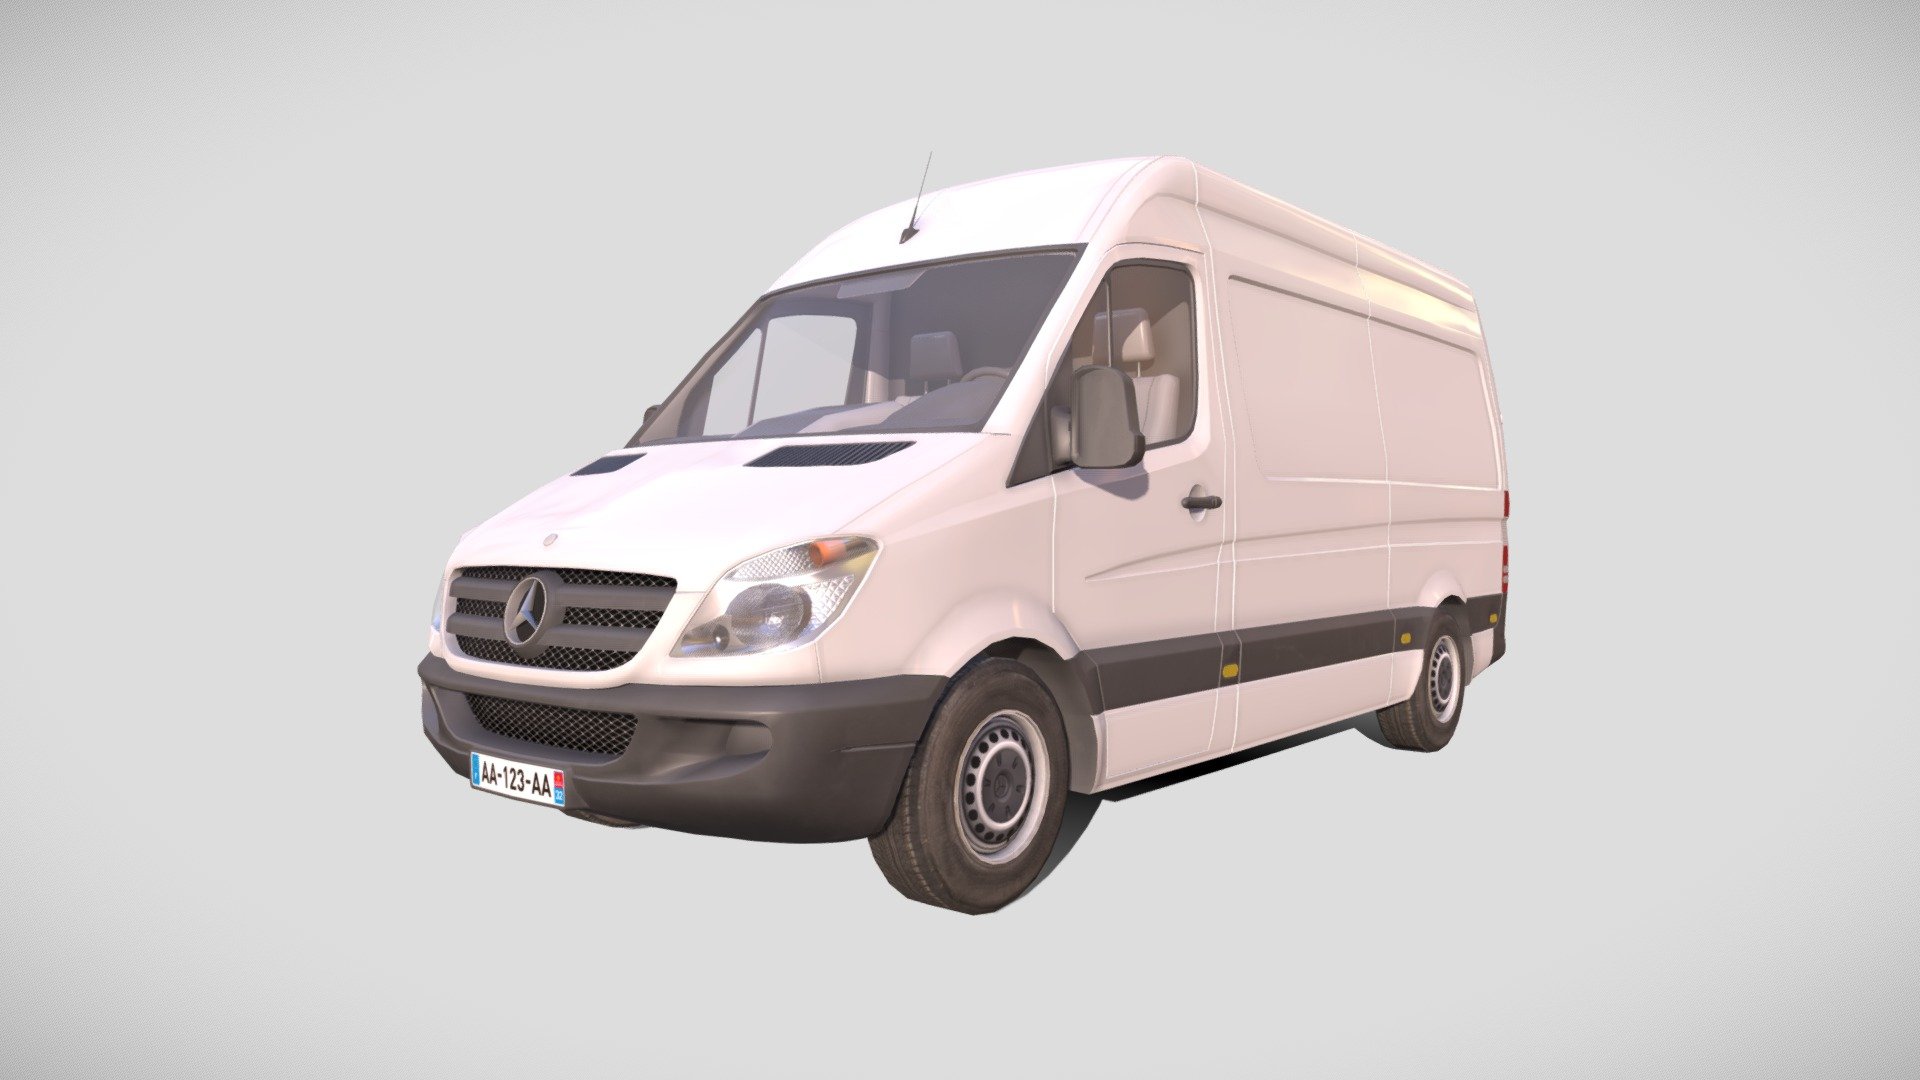 Mercedes Benz Sprinter 2006 - Medium Poly
Made on Cinema 4D Substance Painter and Photoshop. -&gt; 4K Texture
 This model is not free of rights 
You must inform me of your usage. 
By Max 
Contact Discord : Max#5532 - Mercedes Benz Sprinter 2006 - Download Free 3D model by Max (@Max-5532) 3d model